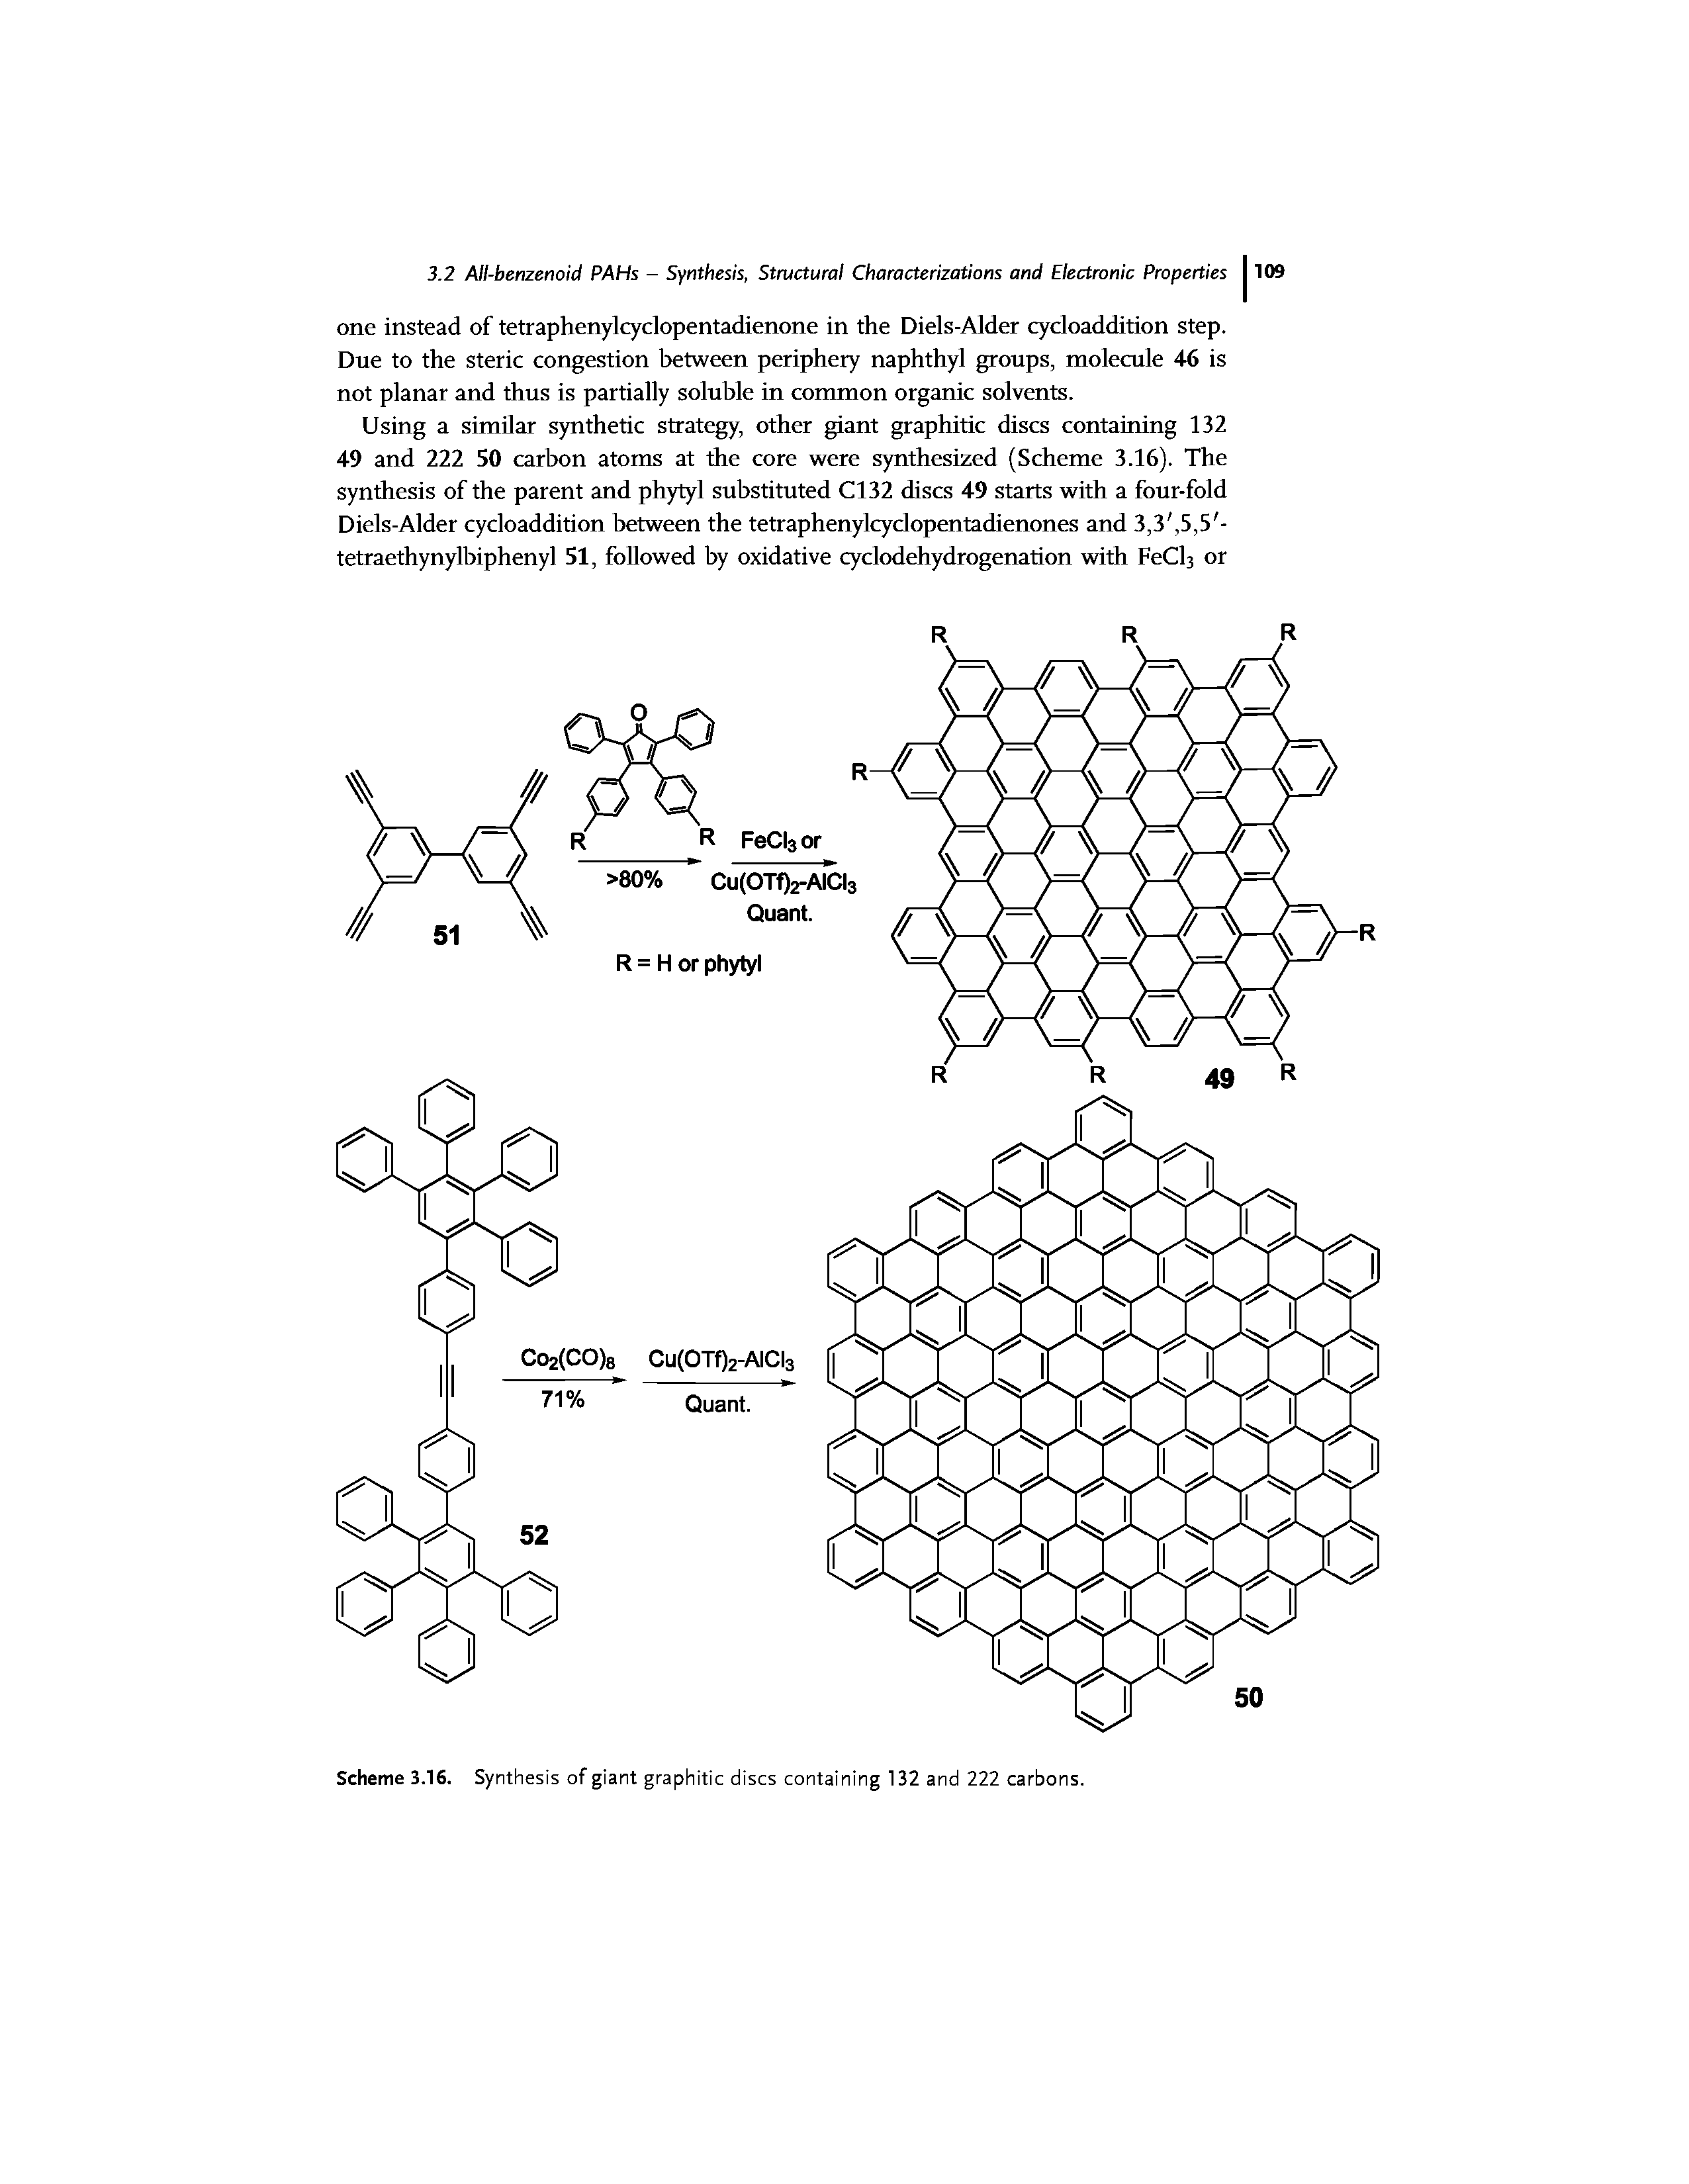 Scheme 3.16. Synthesis of giant graphitic discs containing 132 and 222 carbons.